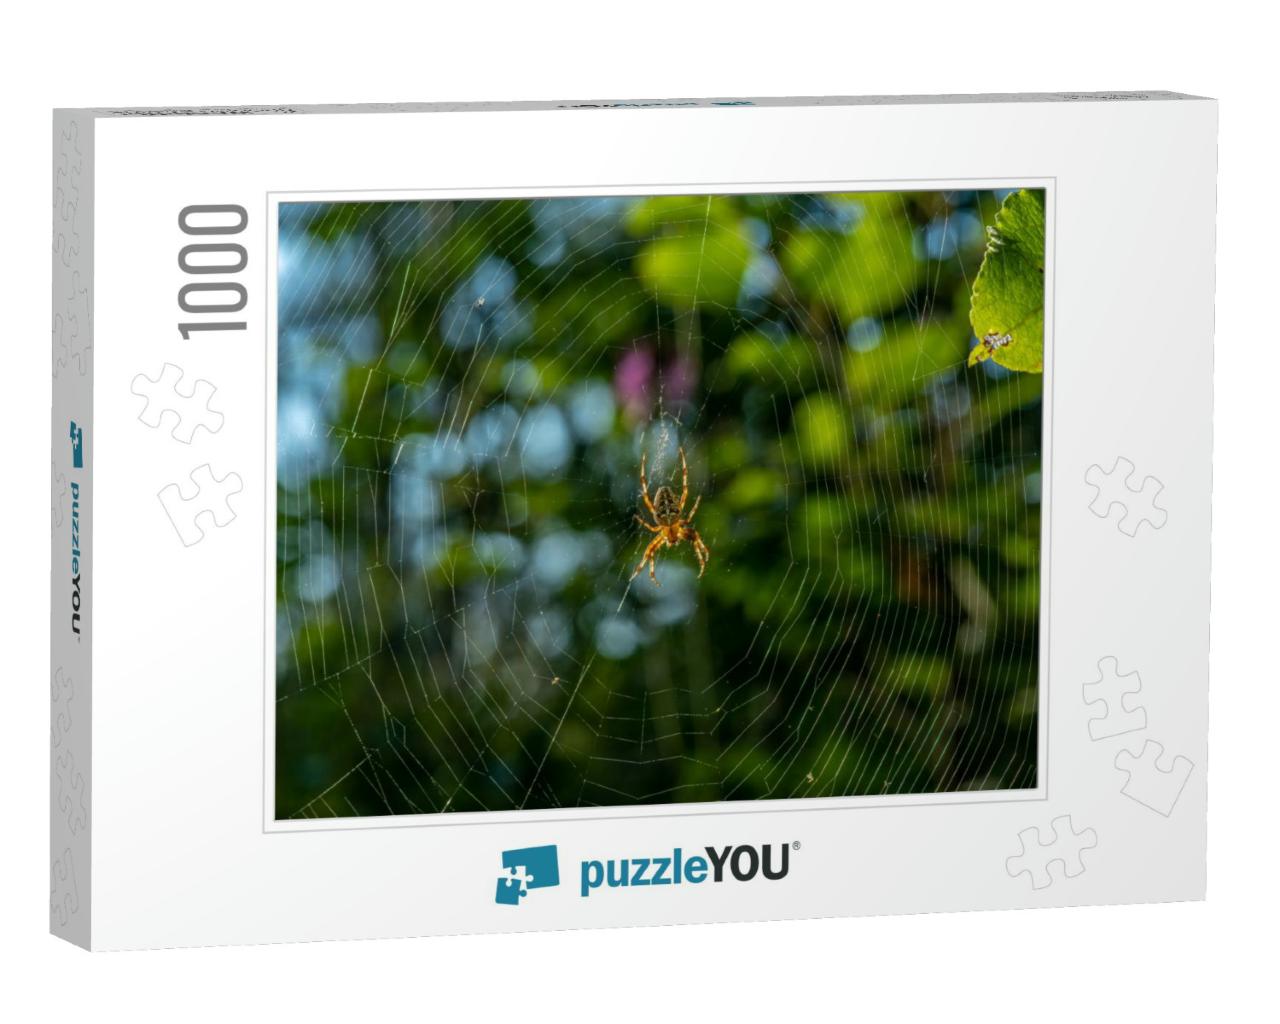 Detailed Close Up of a Large Garden Spider or Cross Spide... Jigsaw Puzzle with 1000 pieces